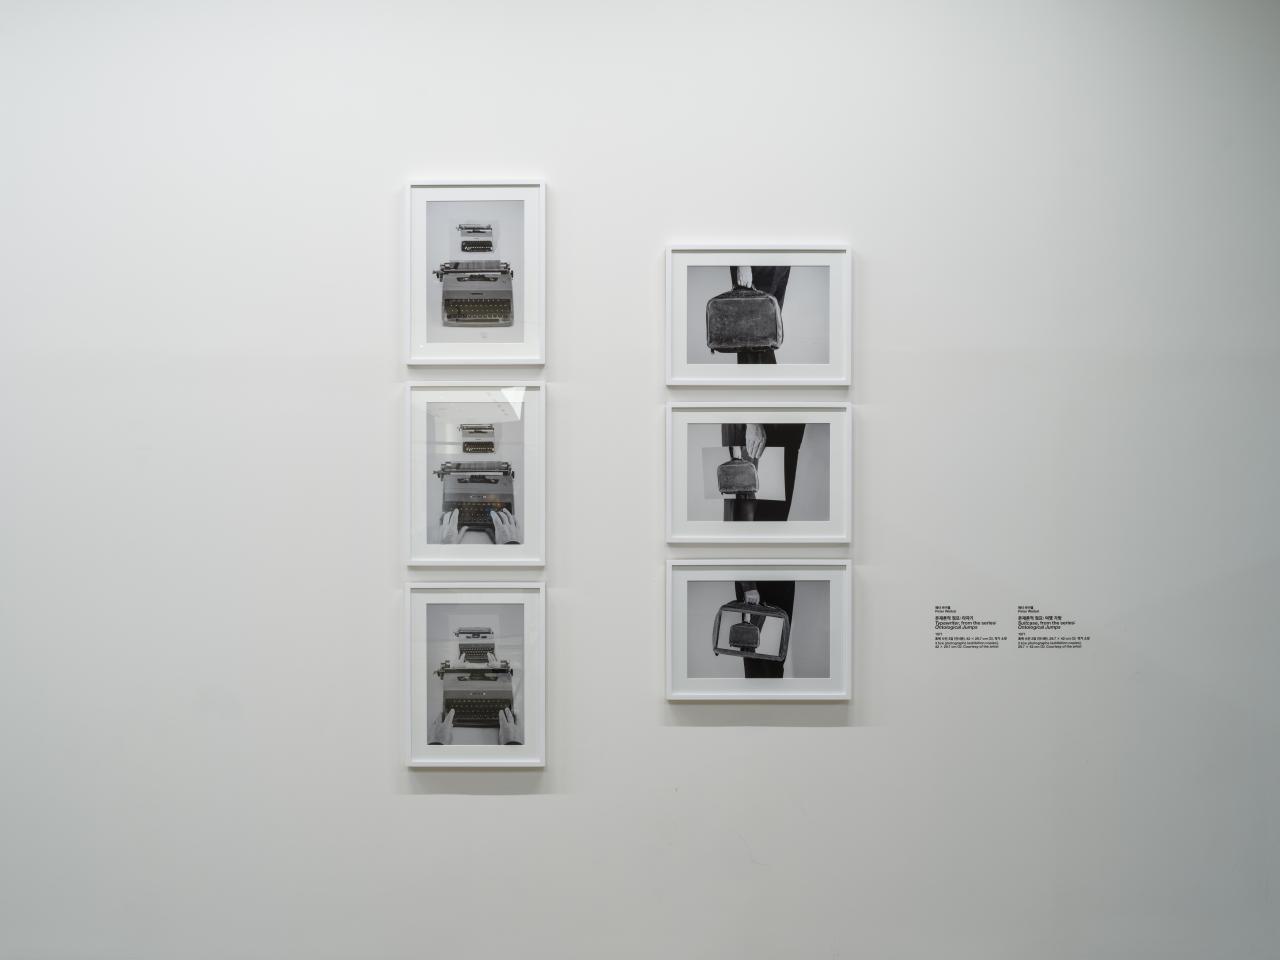 On view are six picture-in-picture, black and white photographs in picture frames on a wall. Three of them show a typewriter, the other three show a hand holding a briefcase.